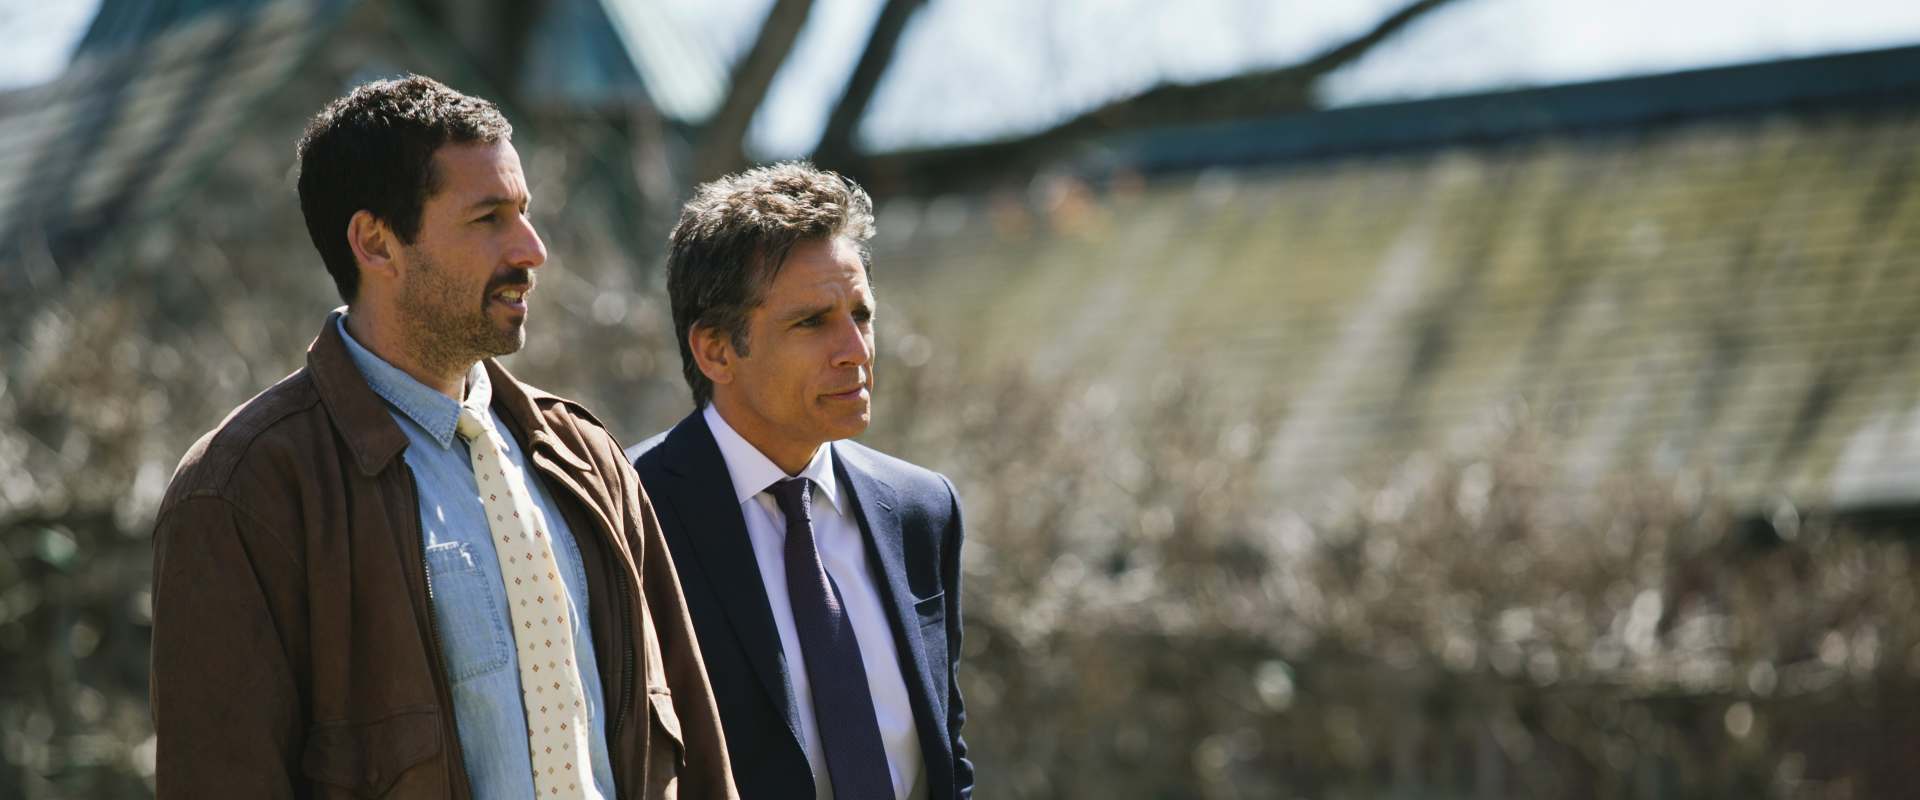 The Meyerowitz Stories (New and Selected) background 2